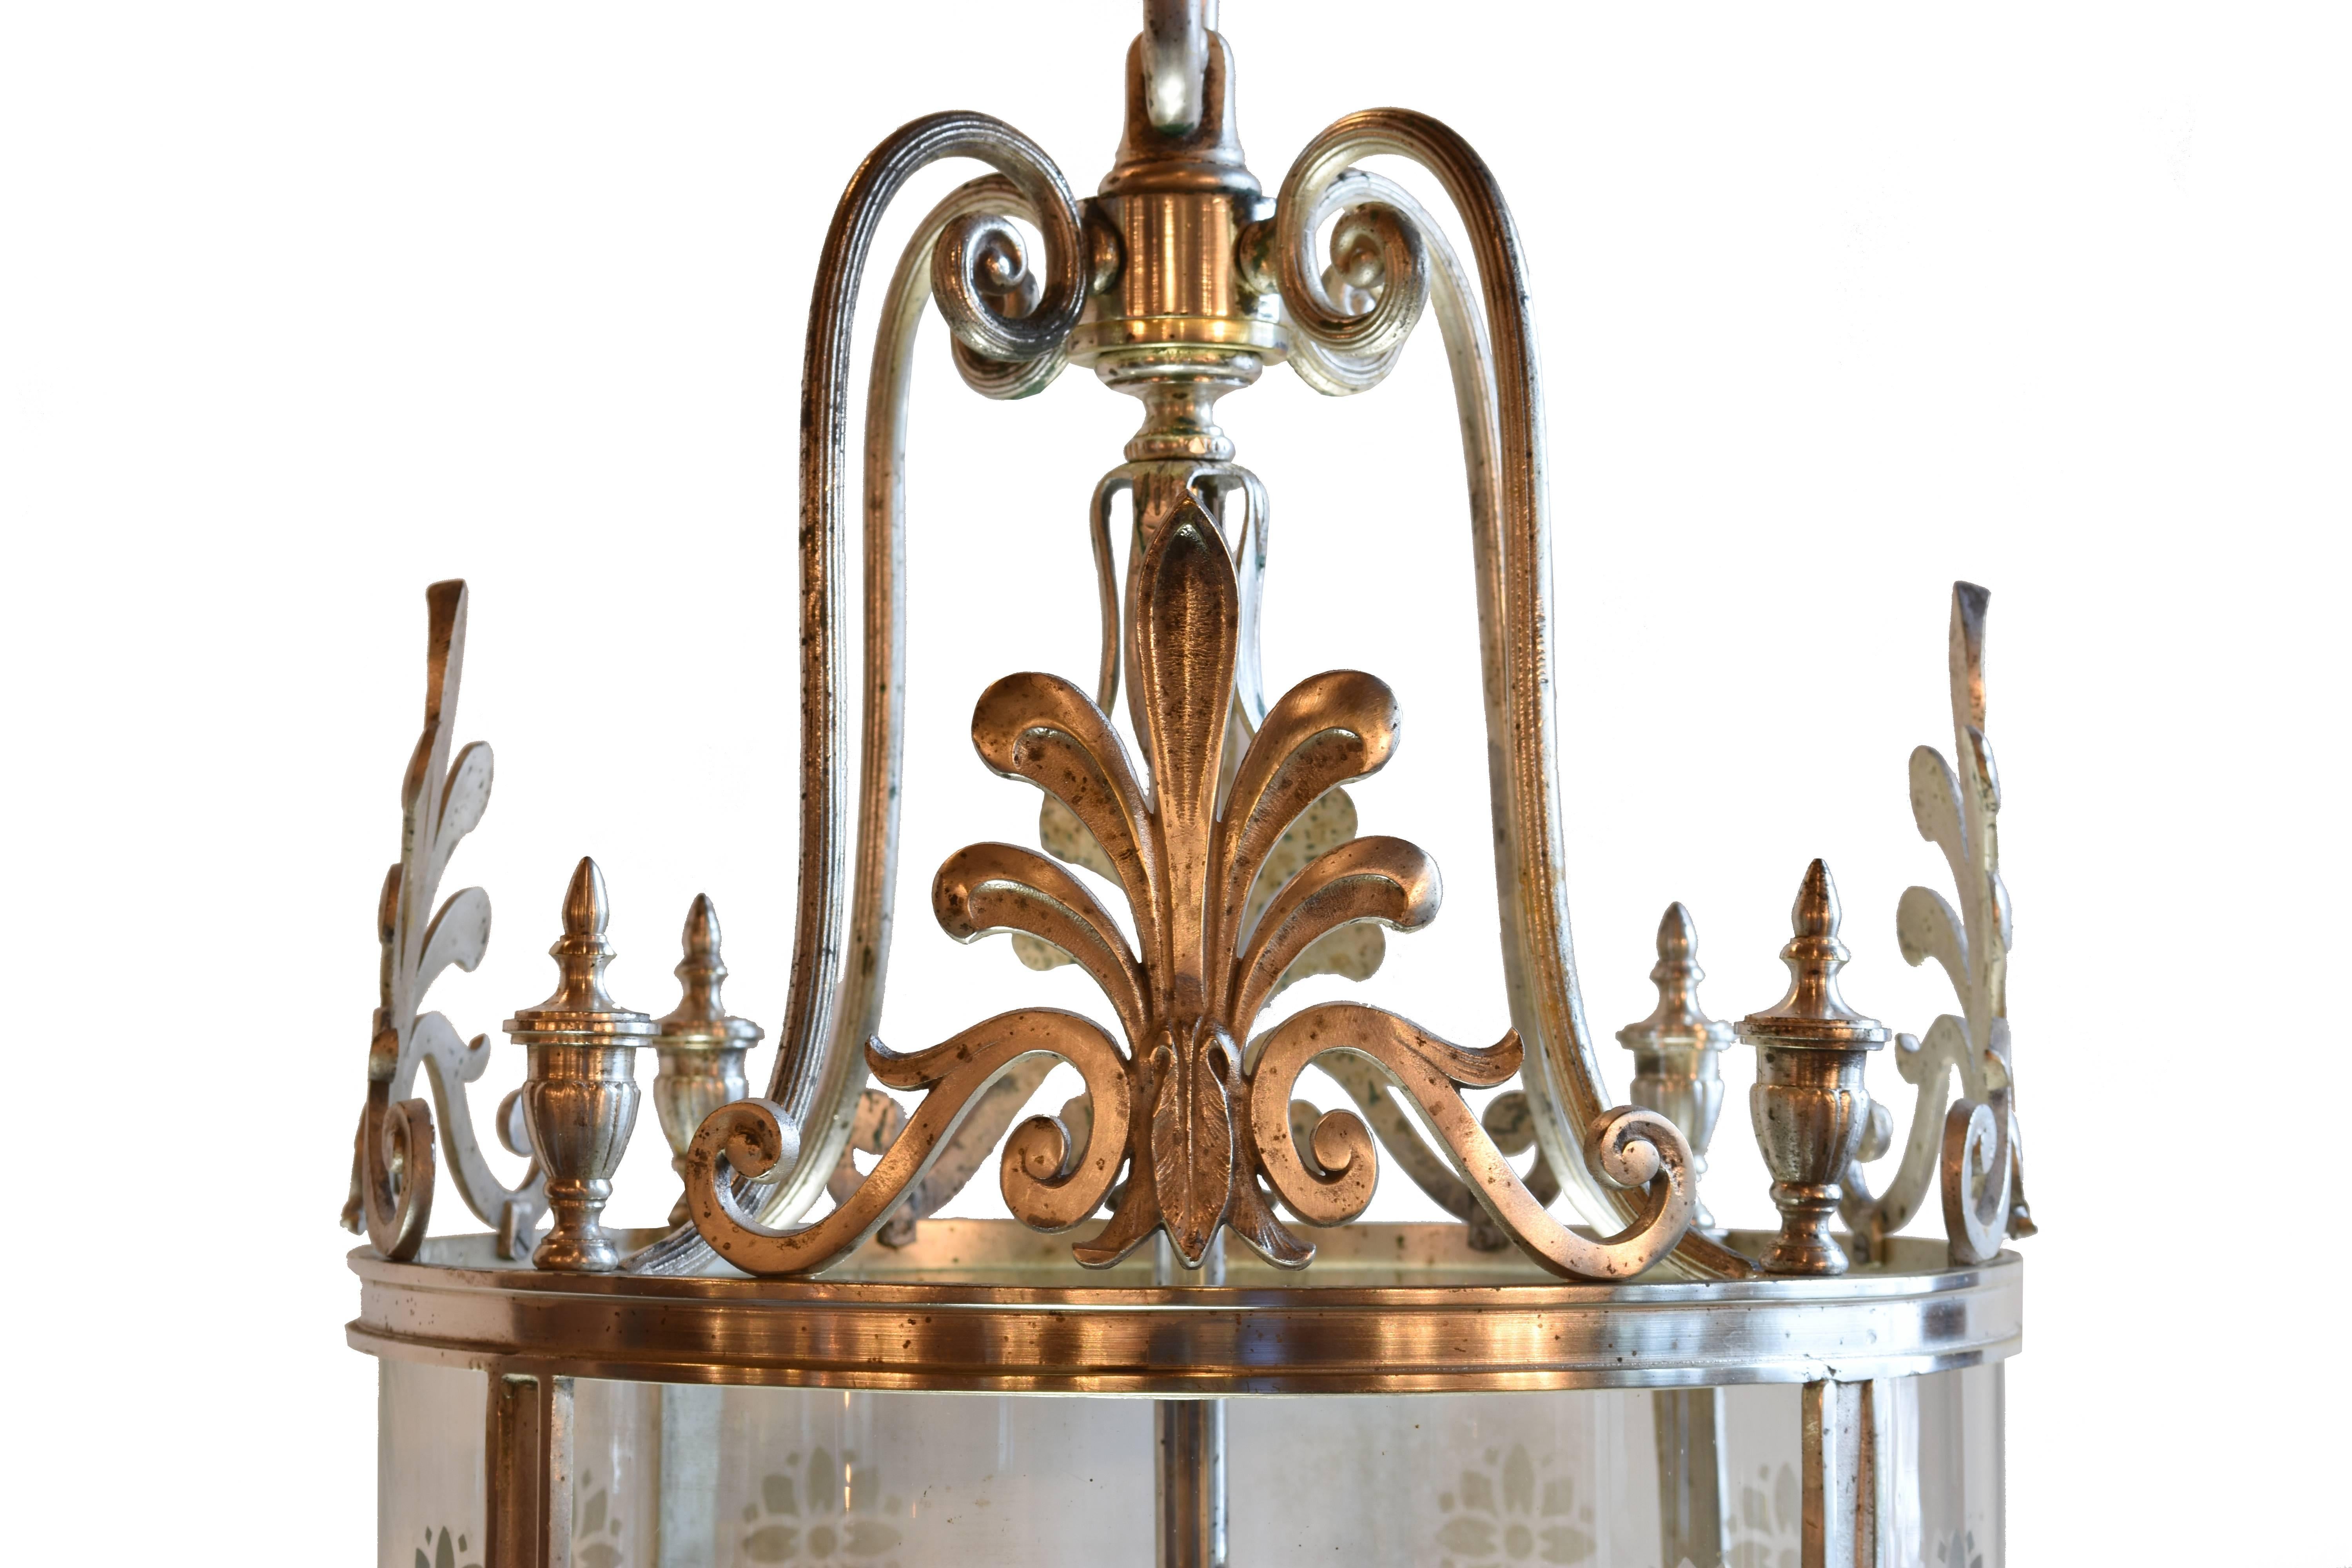 Created in 1927, these pendants originally came from a Downtown Chicago car dealership where no expense was spared. Silver plate over brass, each pendant features a seven light cluster body, cast finials, Federal style fans, and a stylized etched